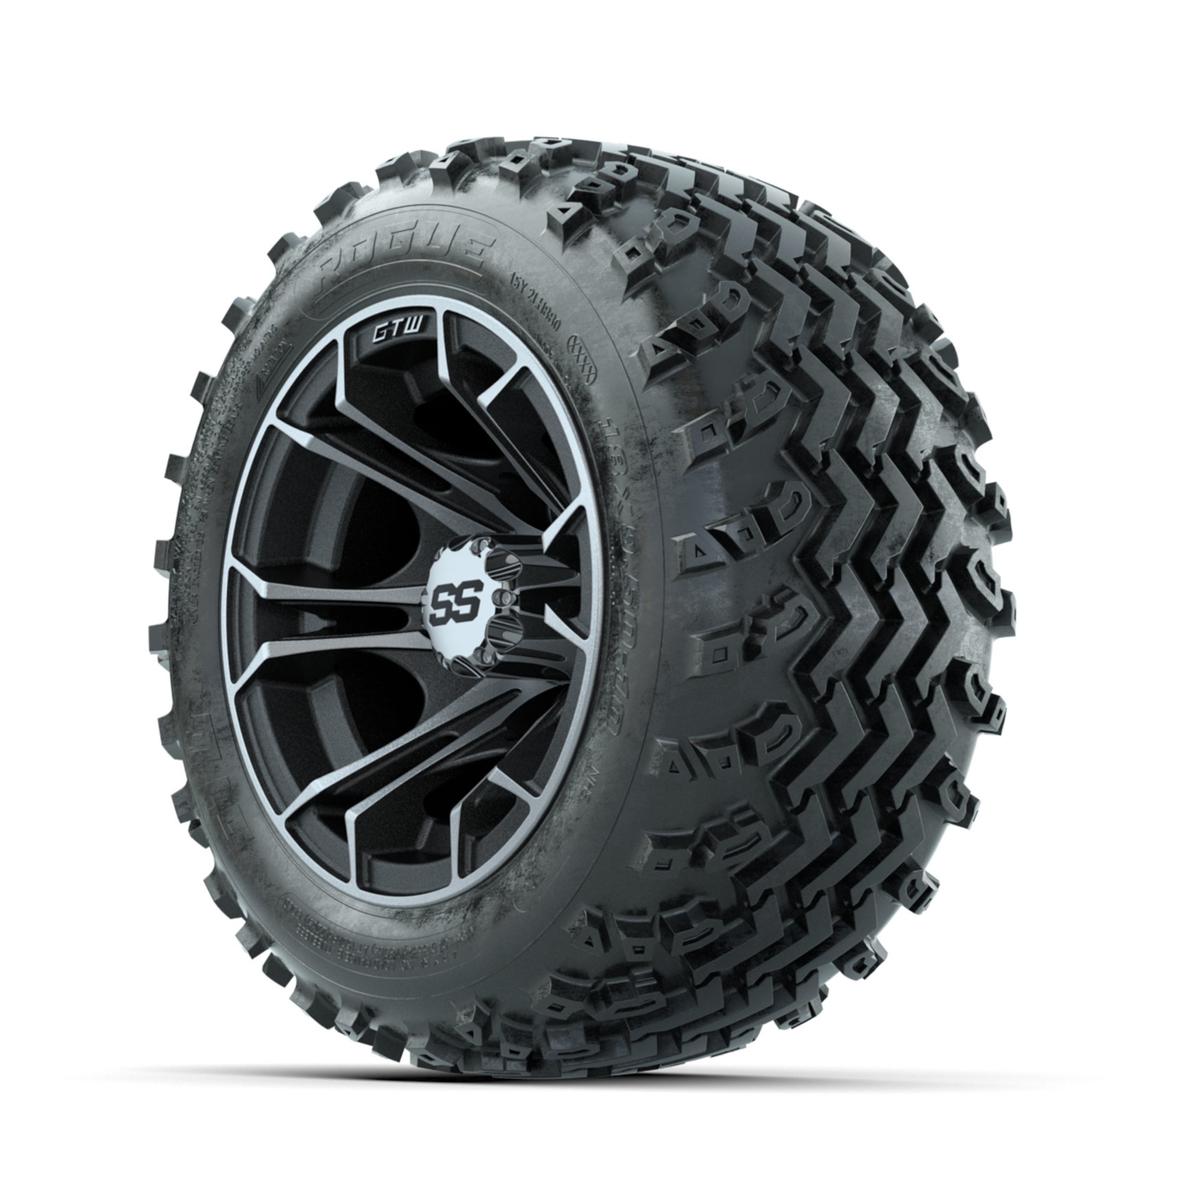 GTW Spyder Machined/Matte Grey 10 in Wheels with 18x9.50-10 Rogue All Terrain Tires – Full Set